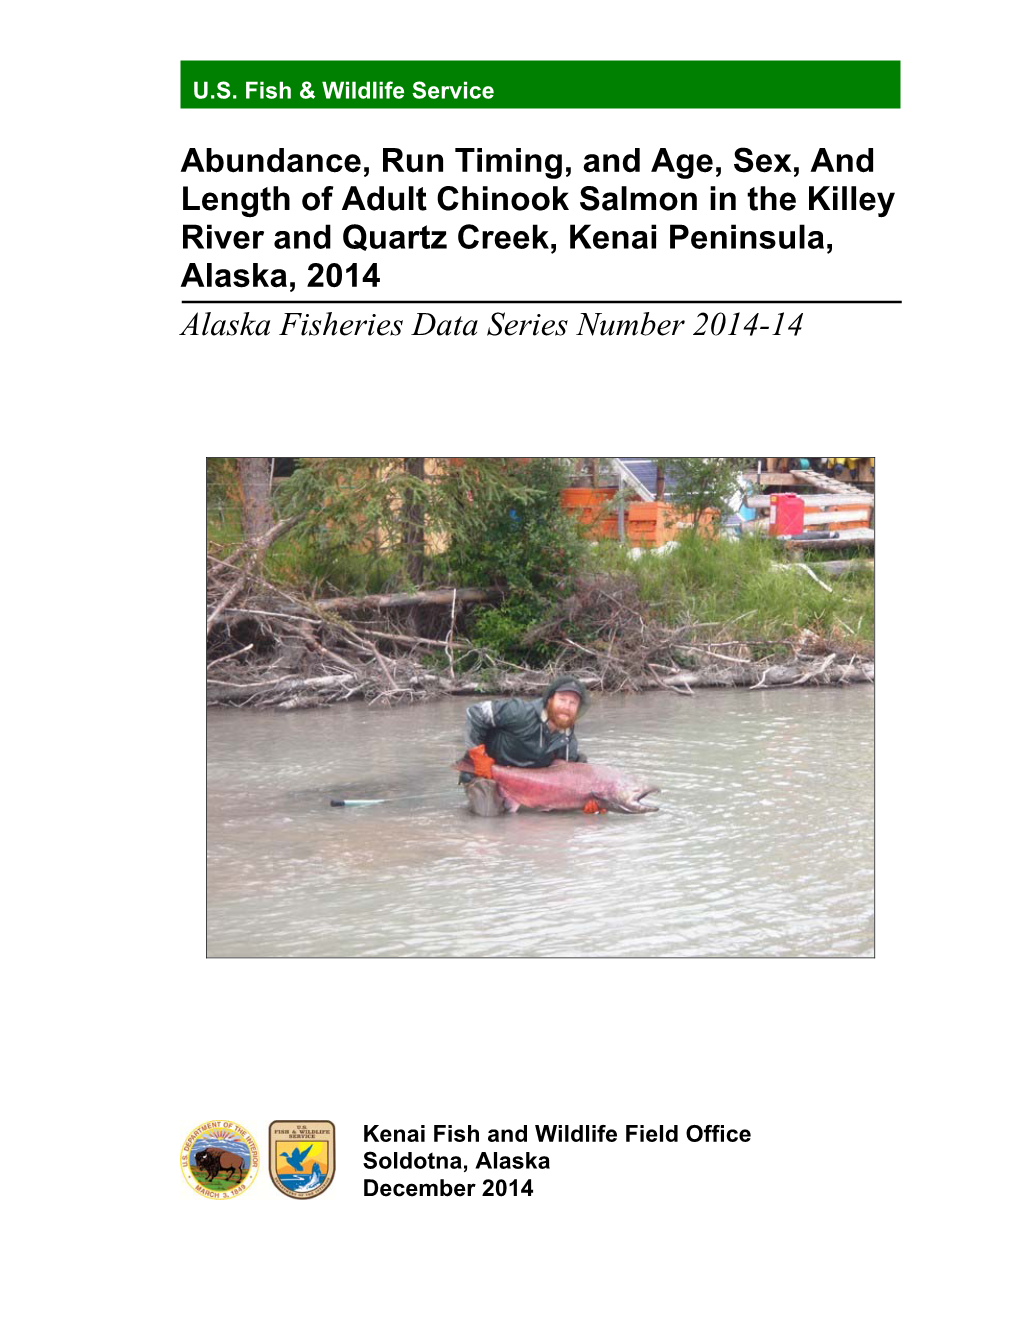 Abundance, Run Timing, and Age, Sex, and Length of Adult Chinook